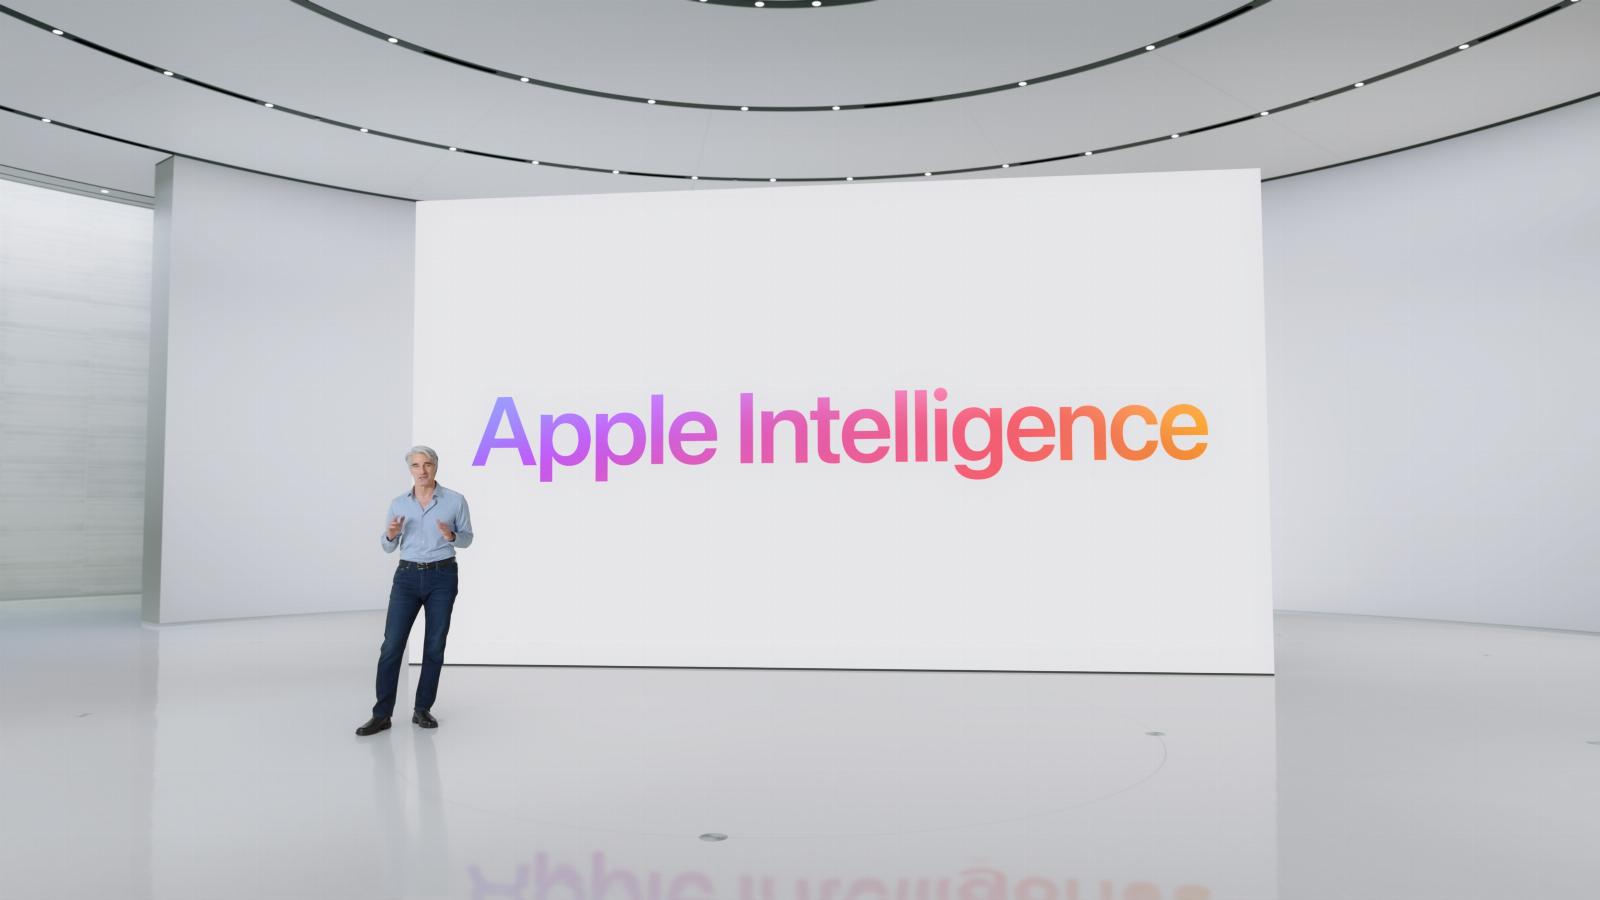 Apple Intelligence features will be available on iPhone 15 Pro and devices with M1 or newer chips